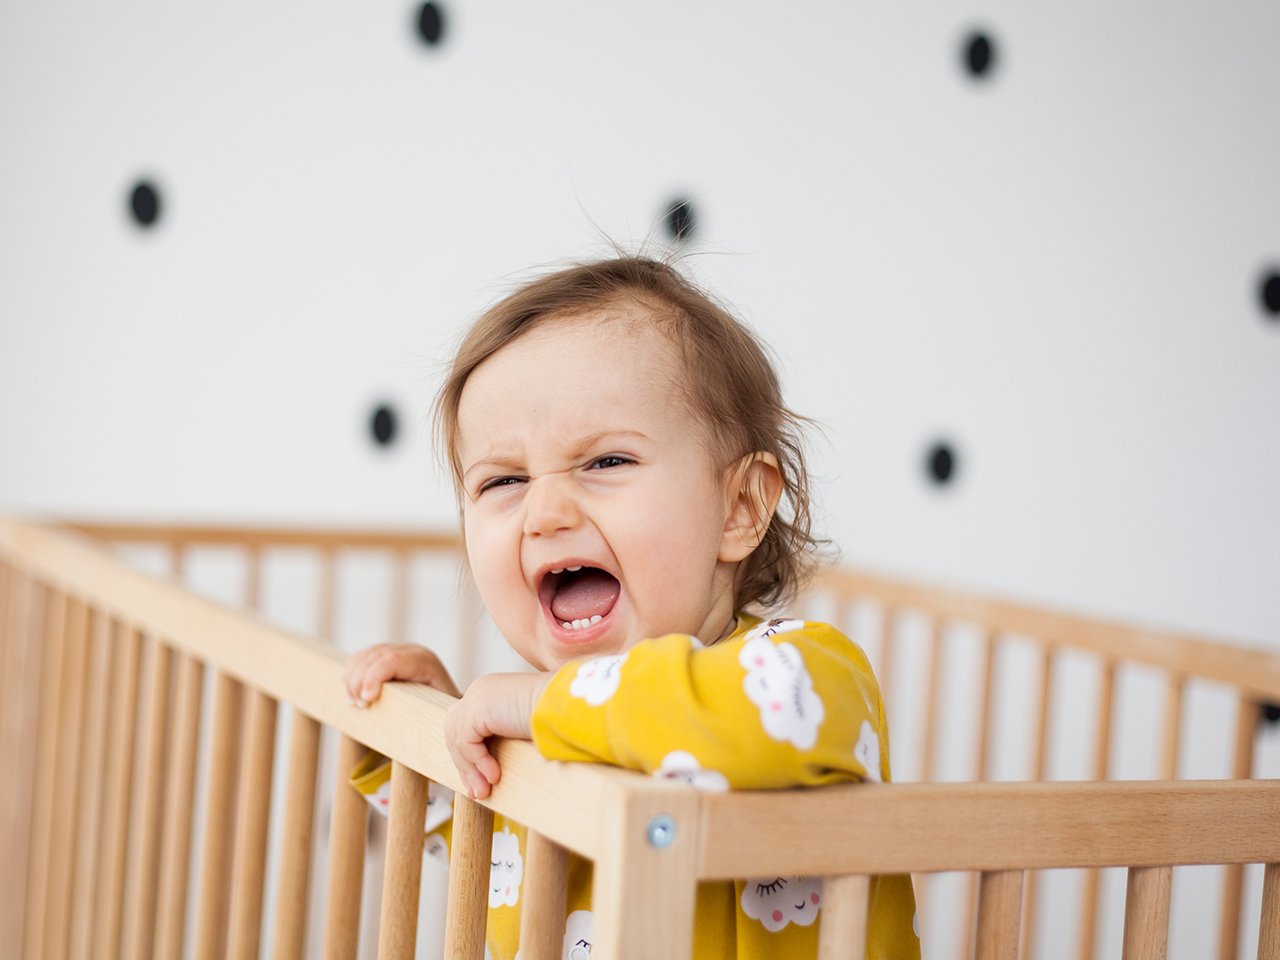 Why does my toddler suddenly hate everyone"